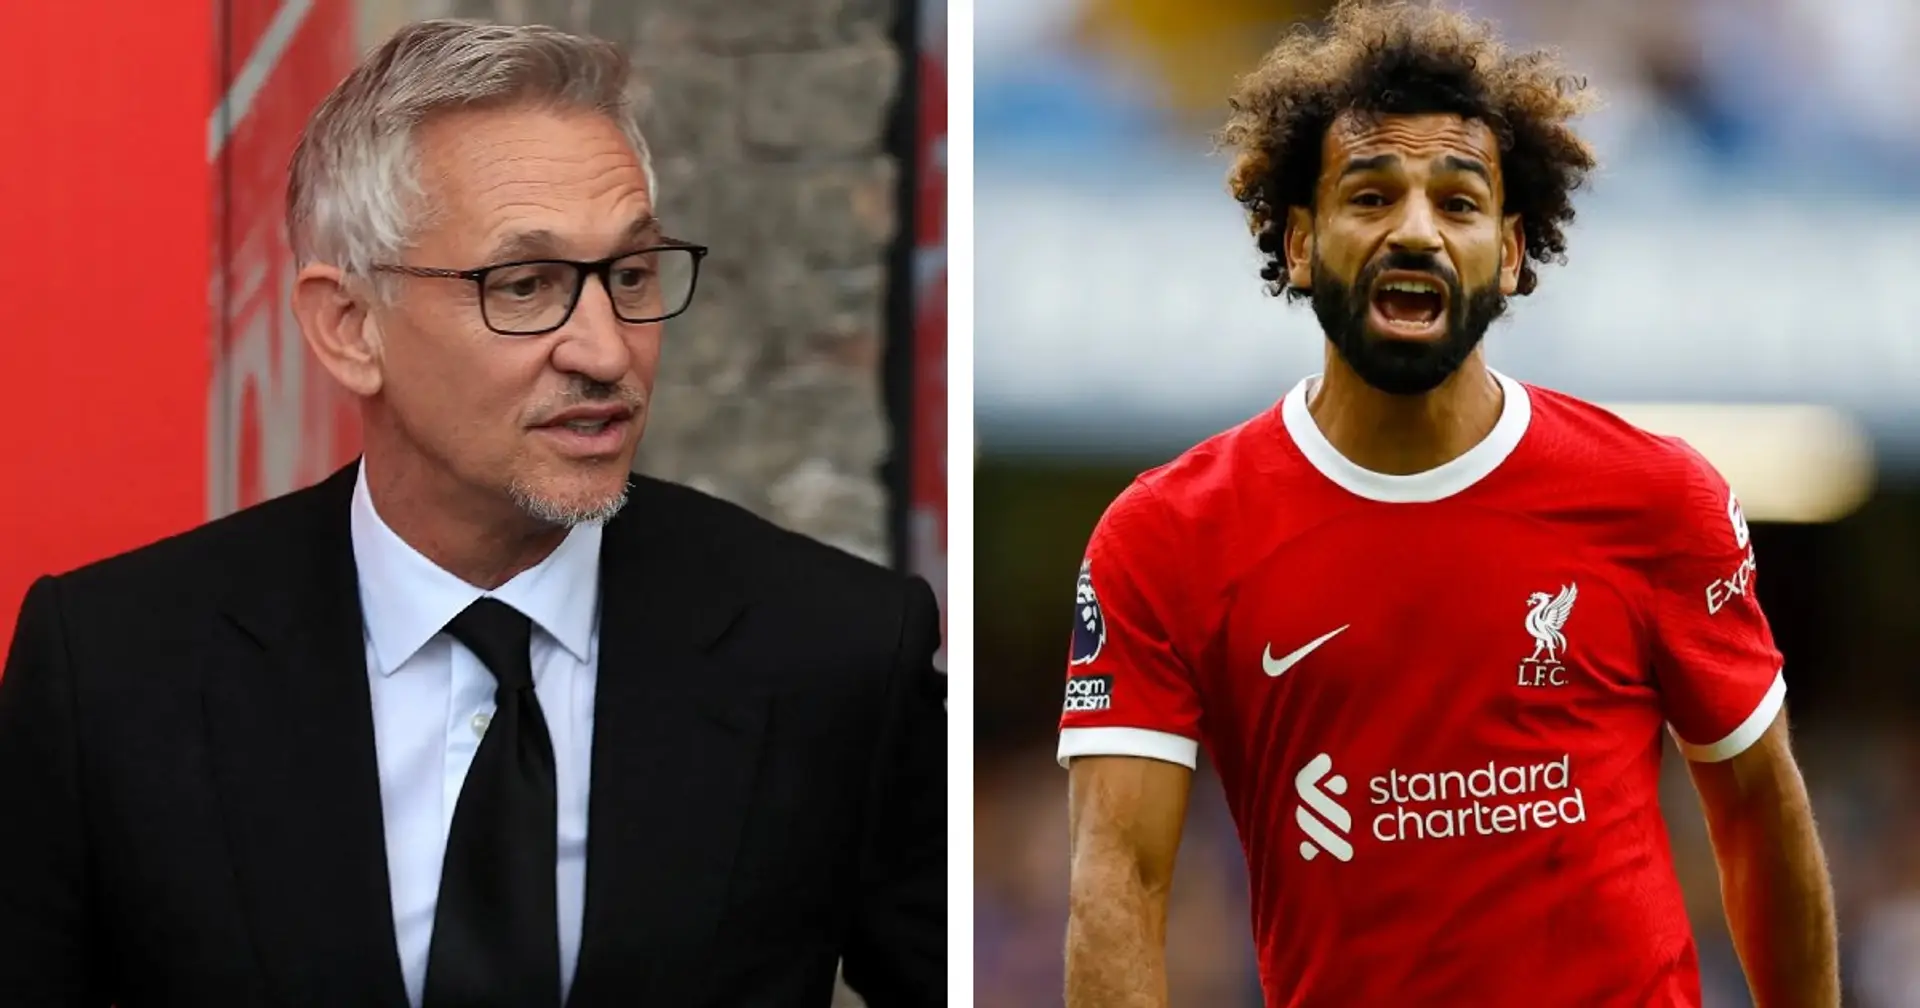 'He's just having a bad patch': Lineker defends Mo Salah 